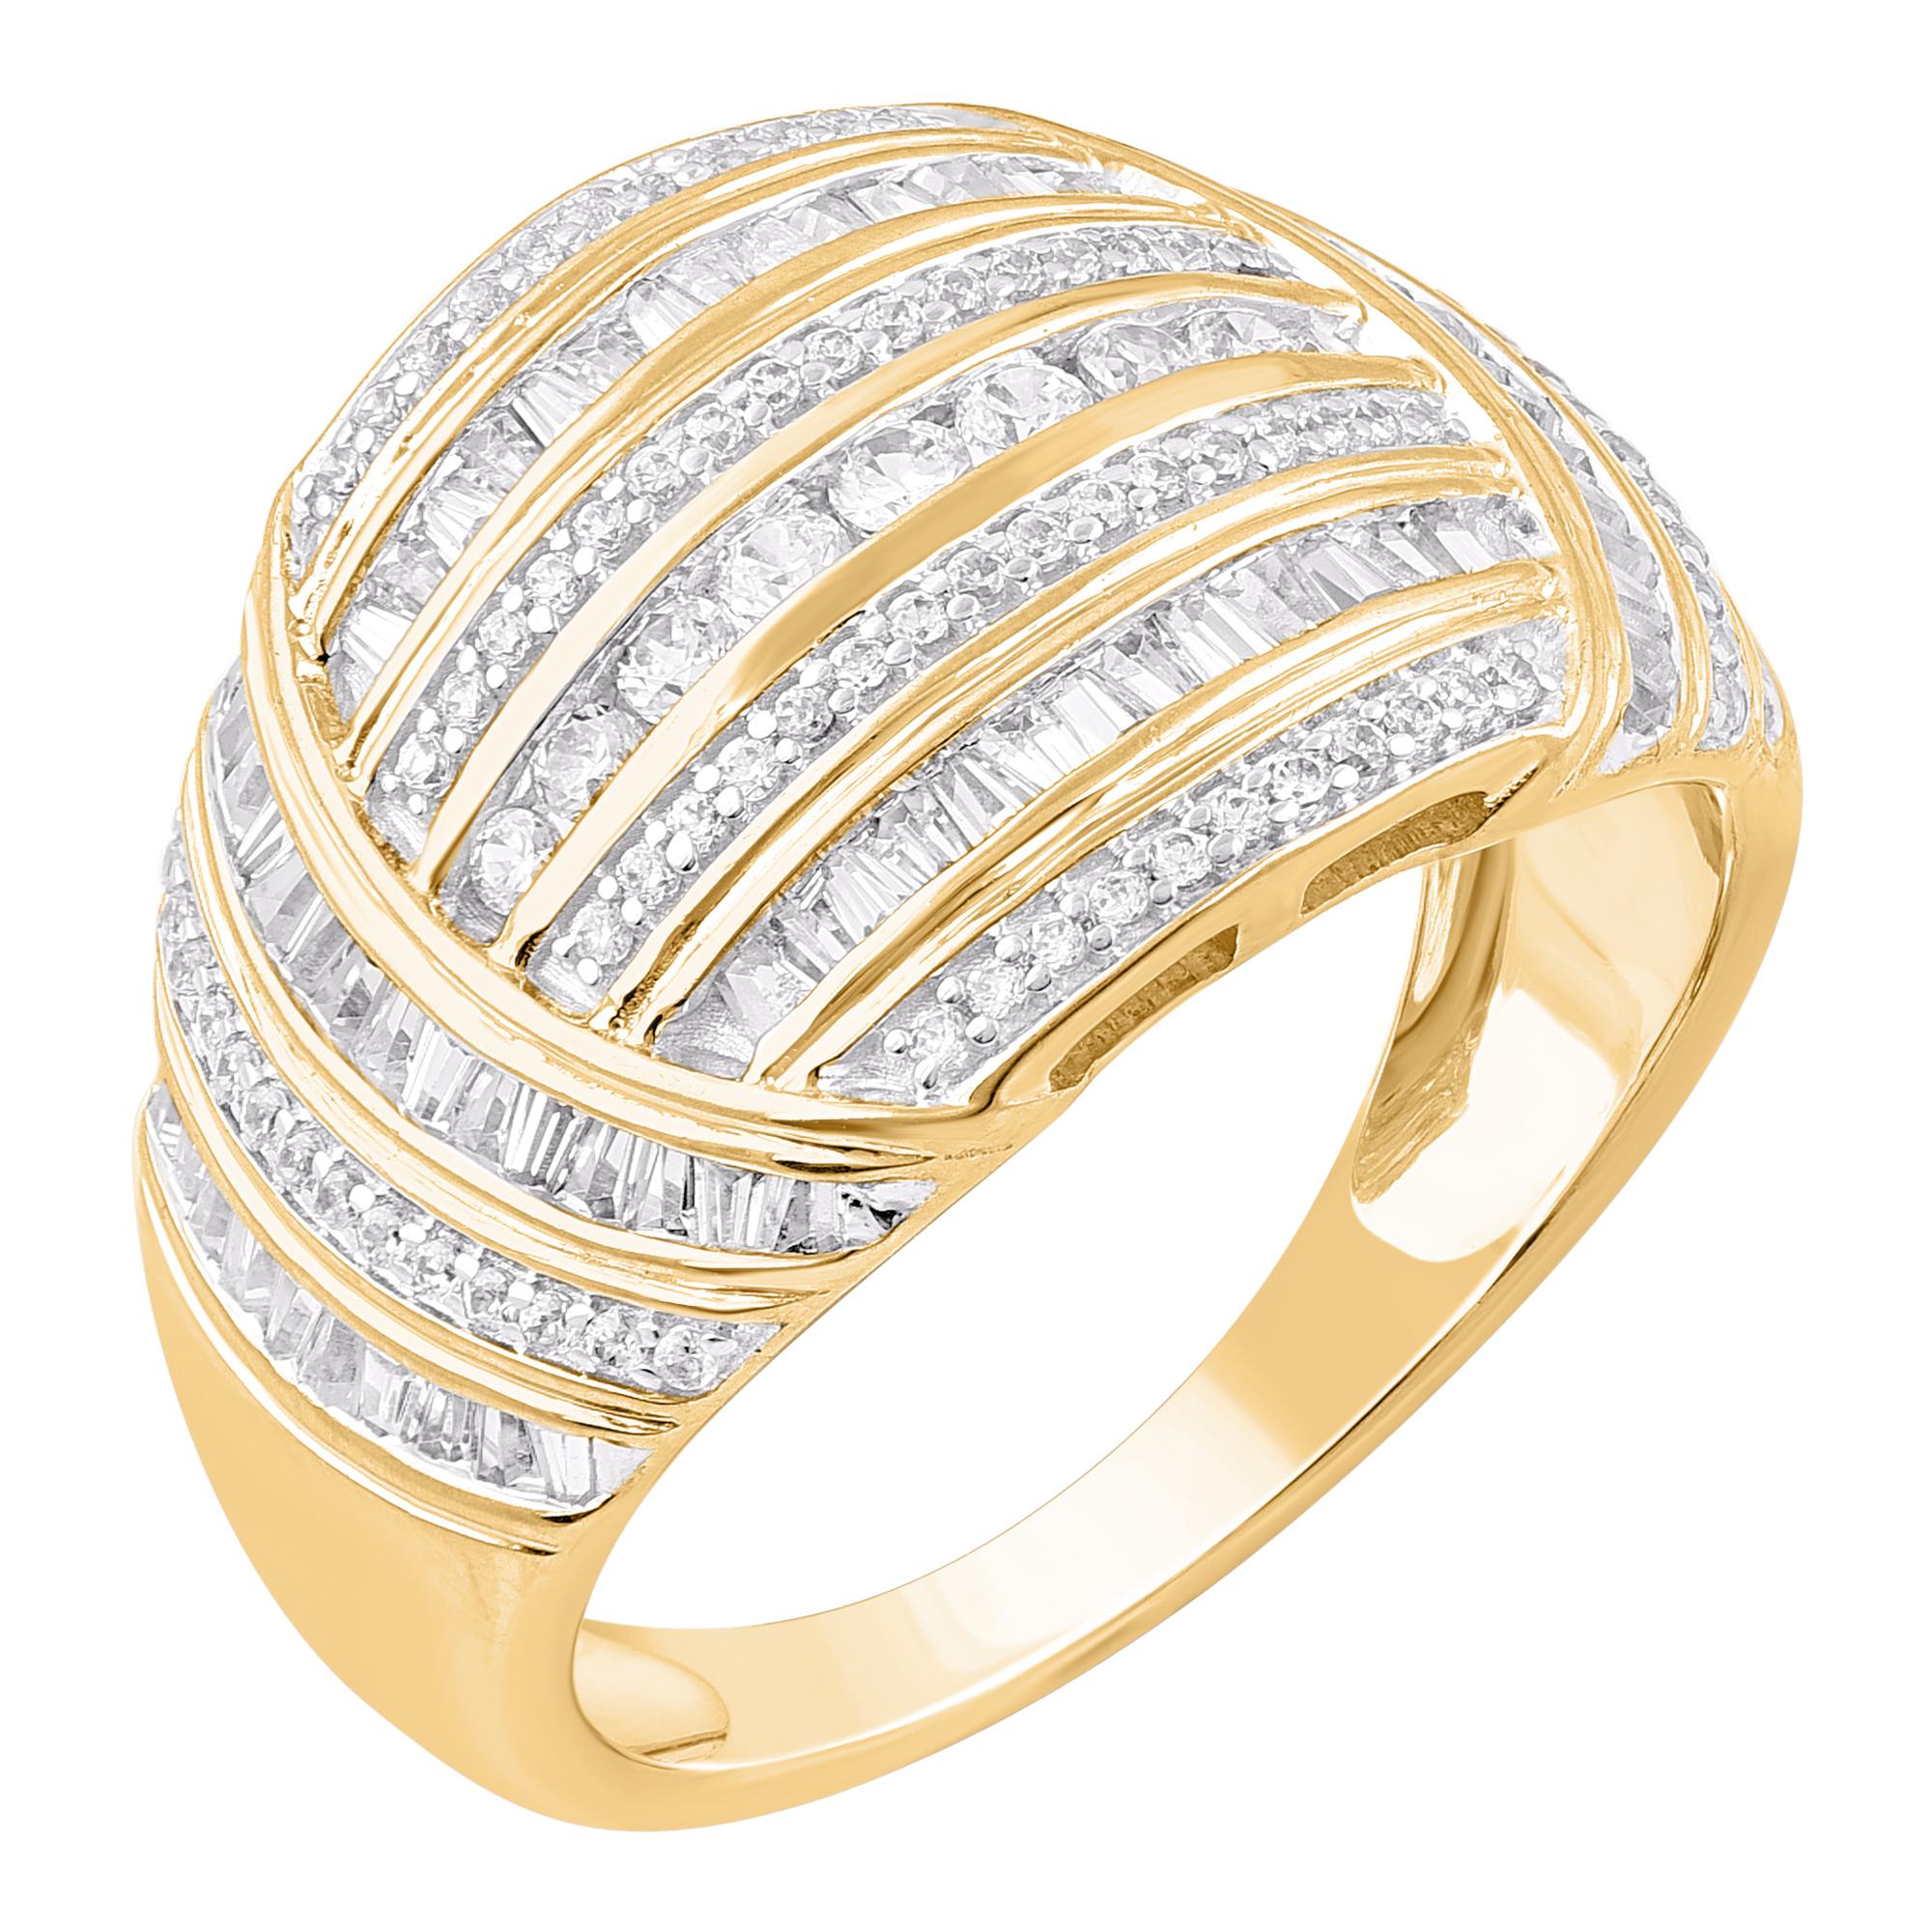 Truly exquisite, she'll admire the effortless look of this graceful diamond dome fashion ring. The ring is crafted from 14-karat gold in your choice of white, rose, or yellow, and features 91 round and 76 baguette diamond set in channel and pave